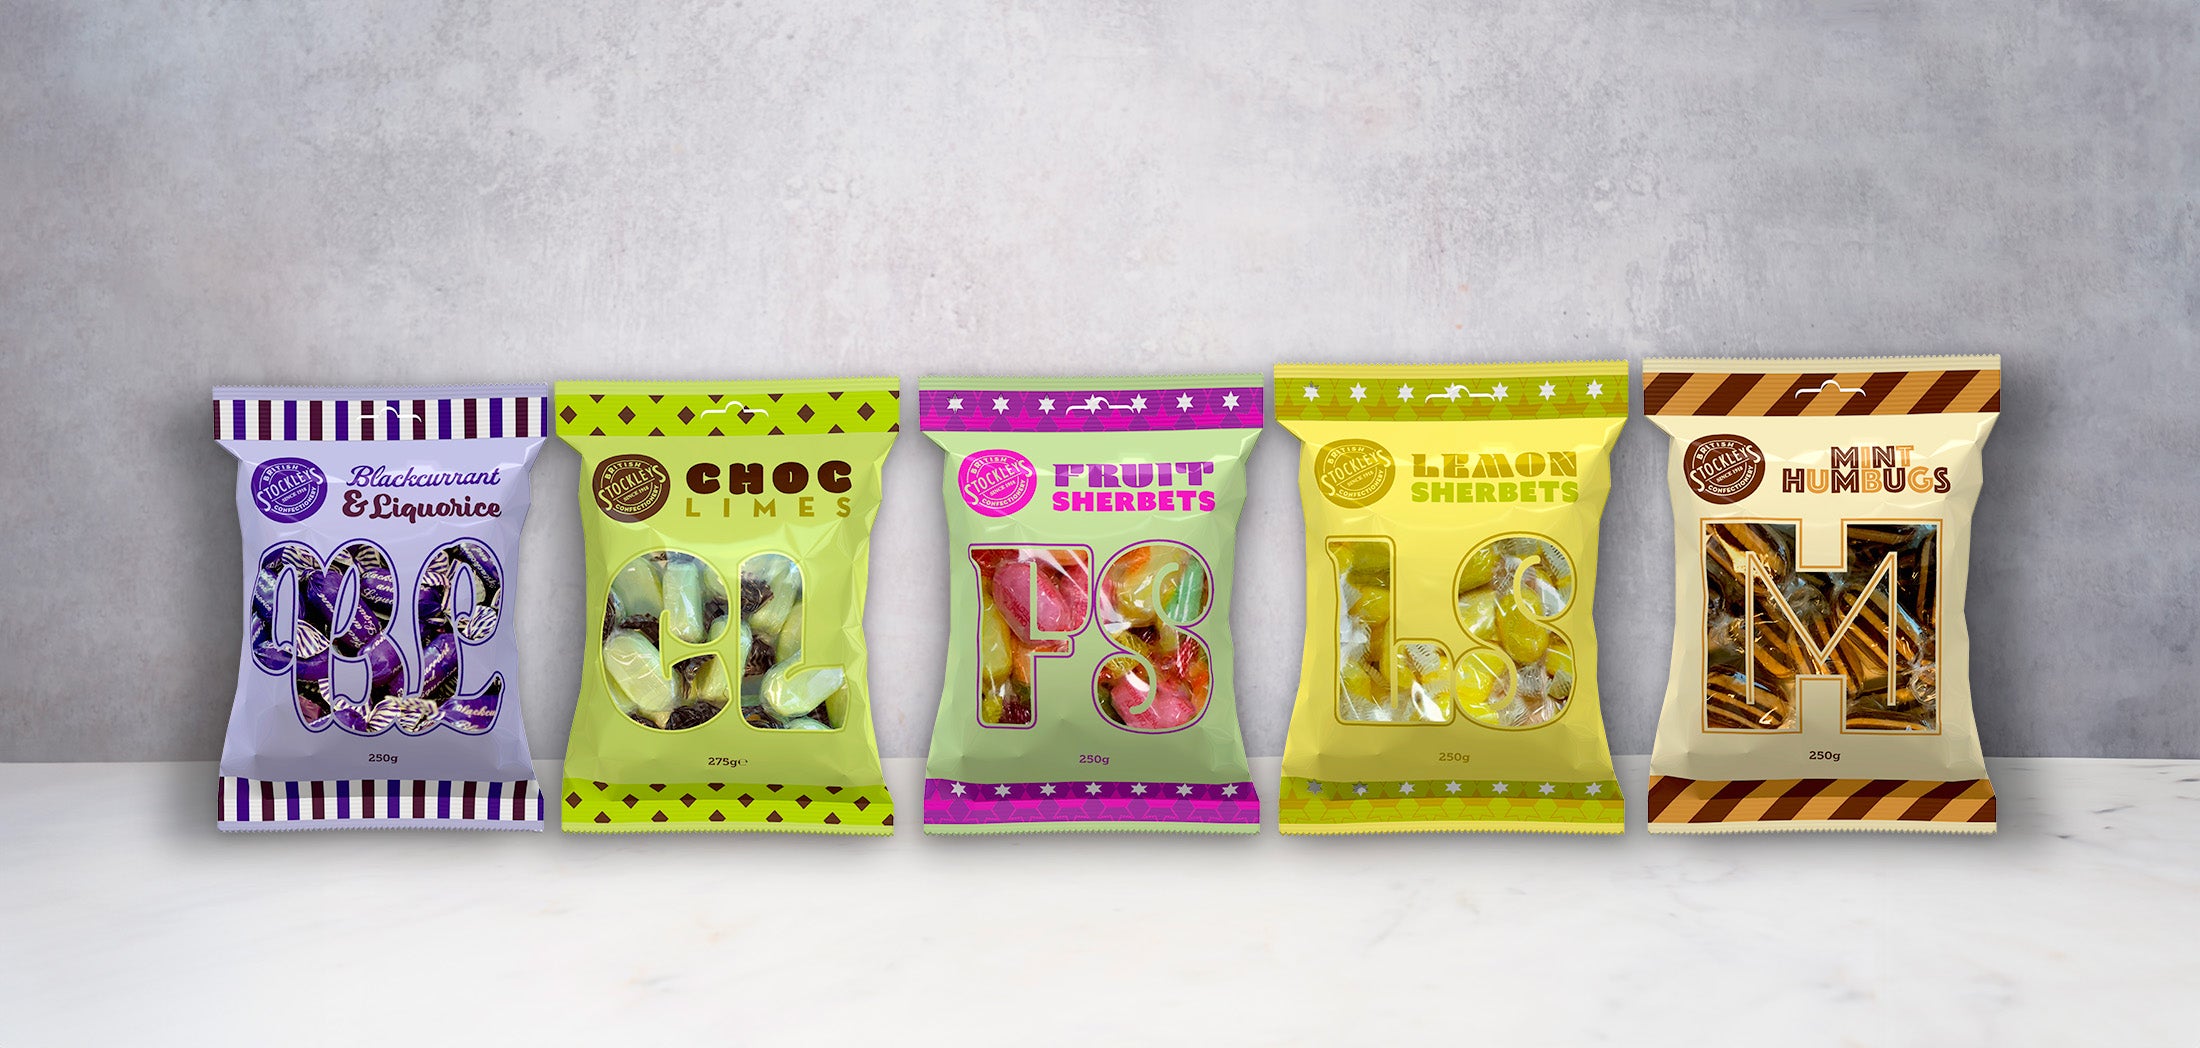 Stockley's Sweets Sharing Bags